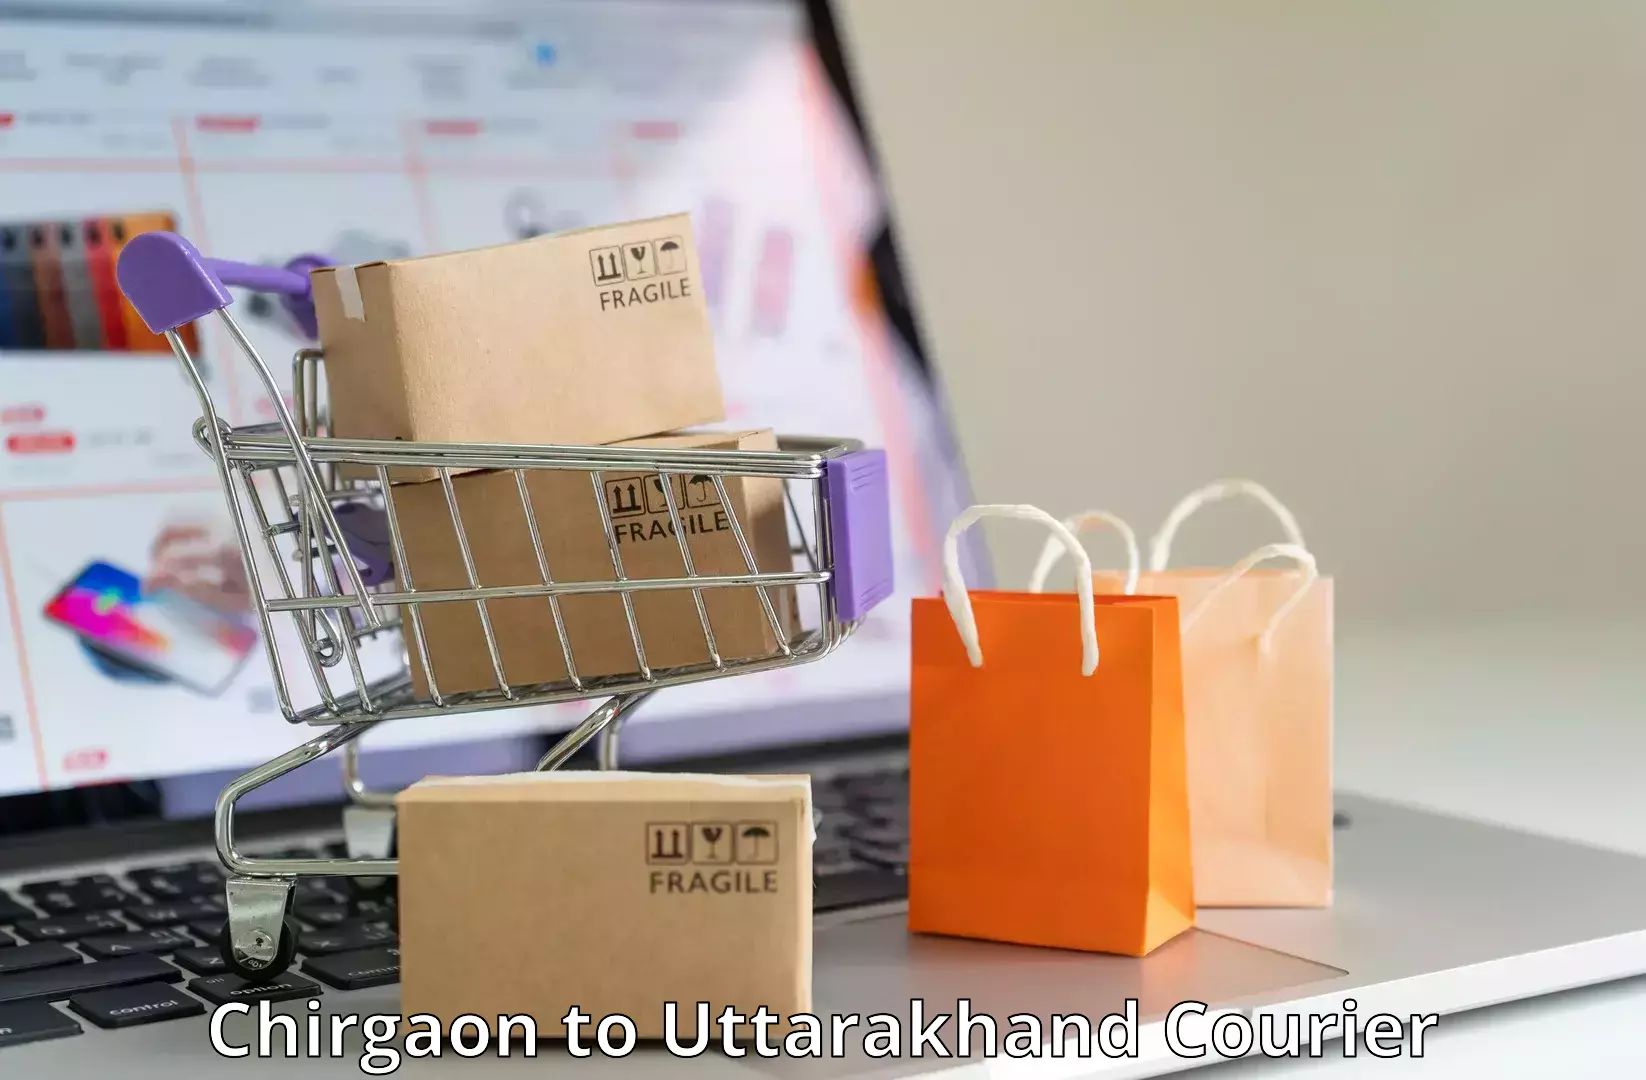 Multi-national courier services Chirgaon to Rudrapur